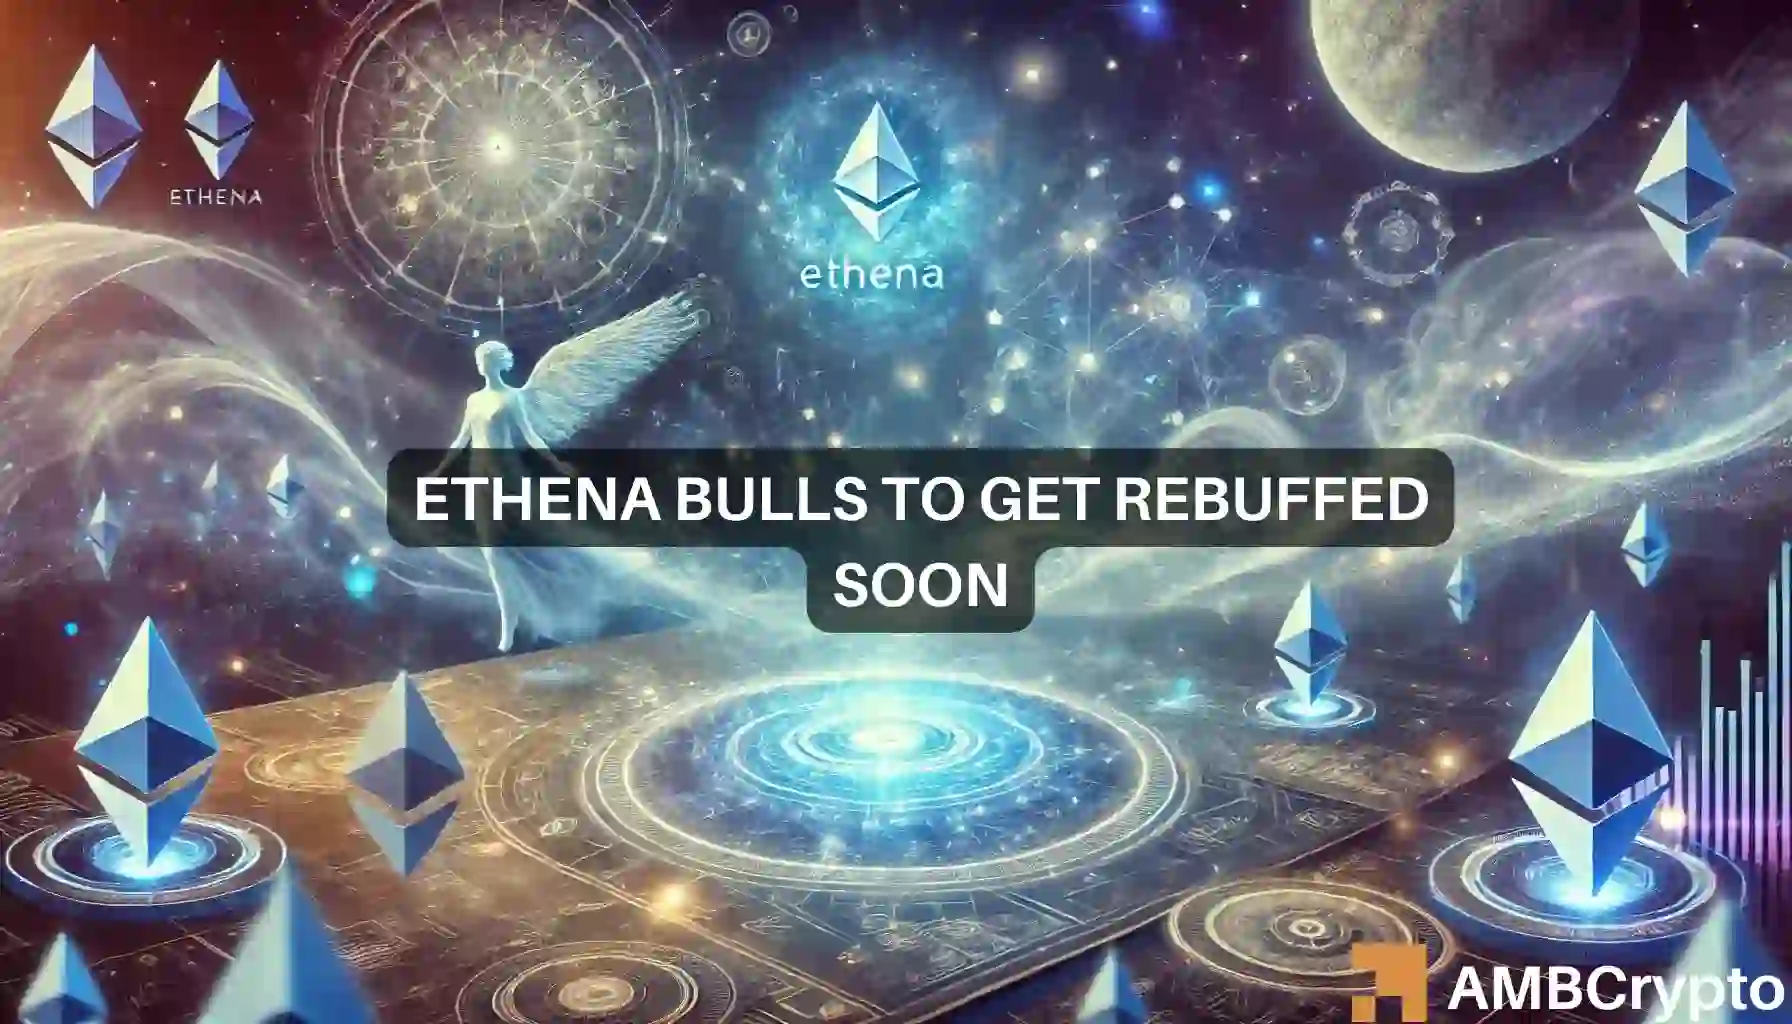 Ethena rallies 45% in two weeks, but bulls still have an uphill battle